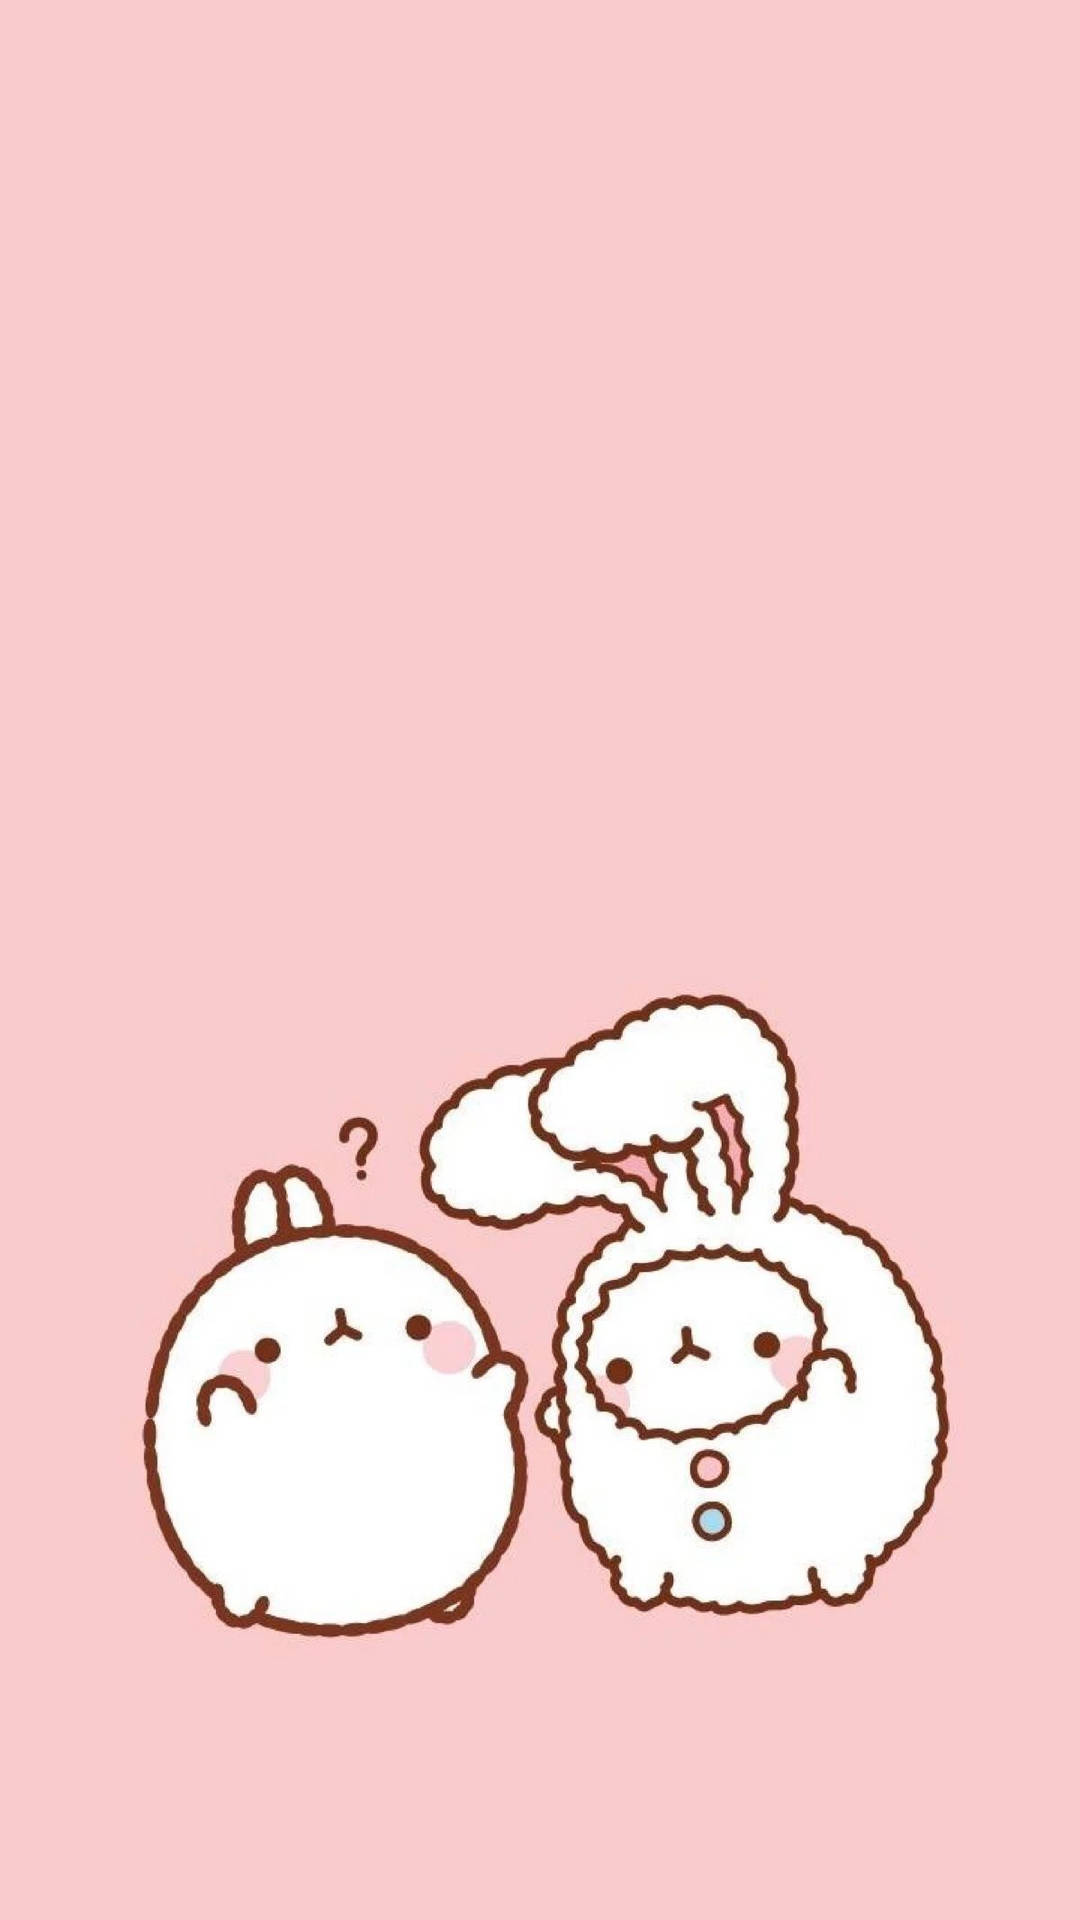 Molang And Friend On Kawaii Ipad Picture